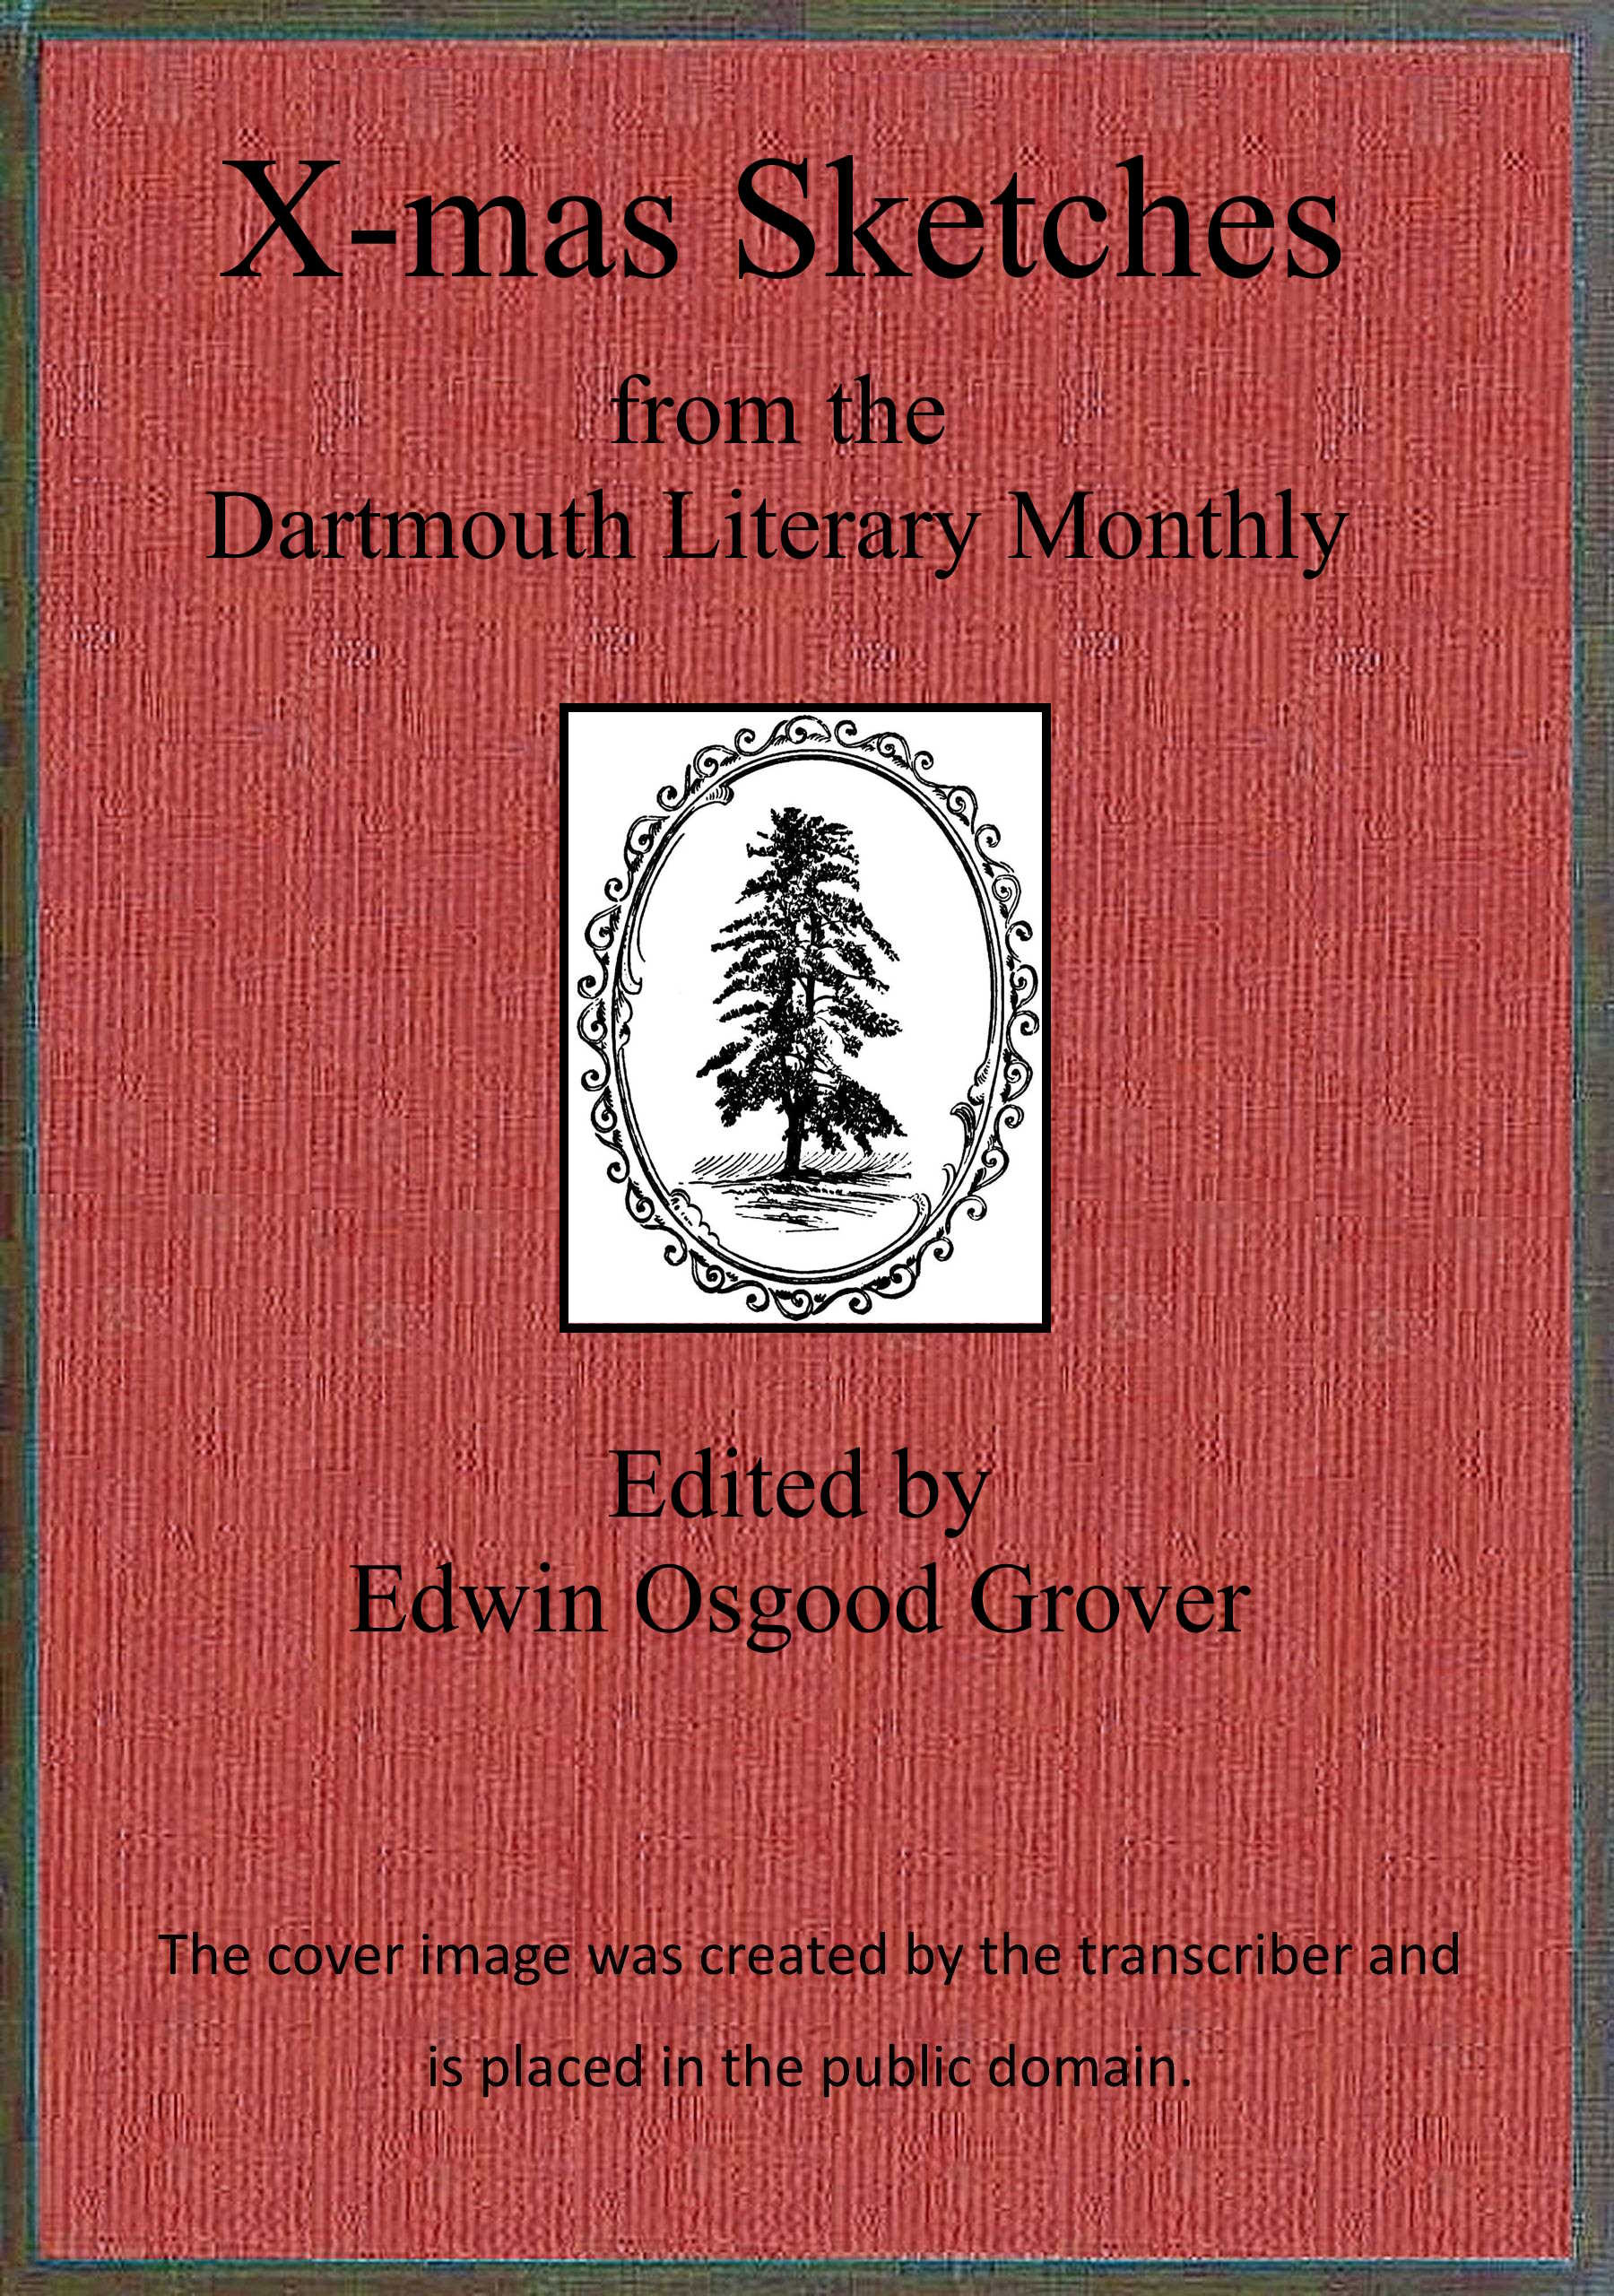 X-mas sketches from the Dartmouth Literary Monthly